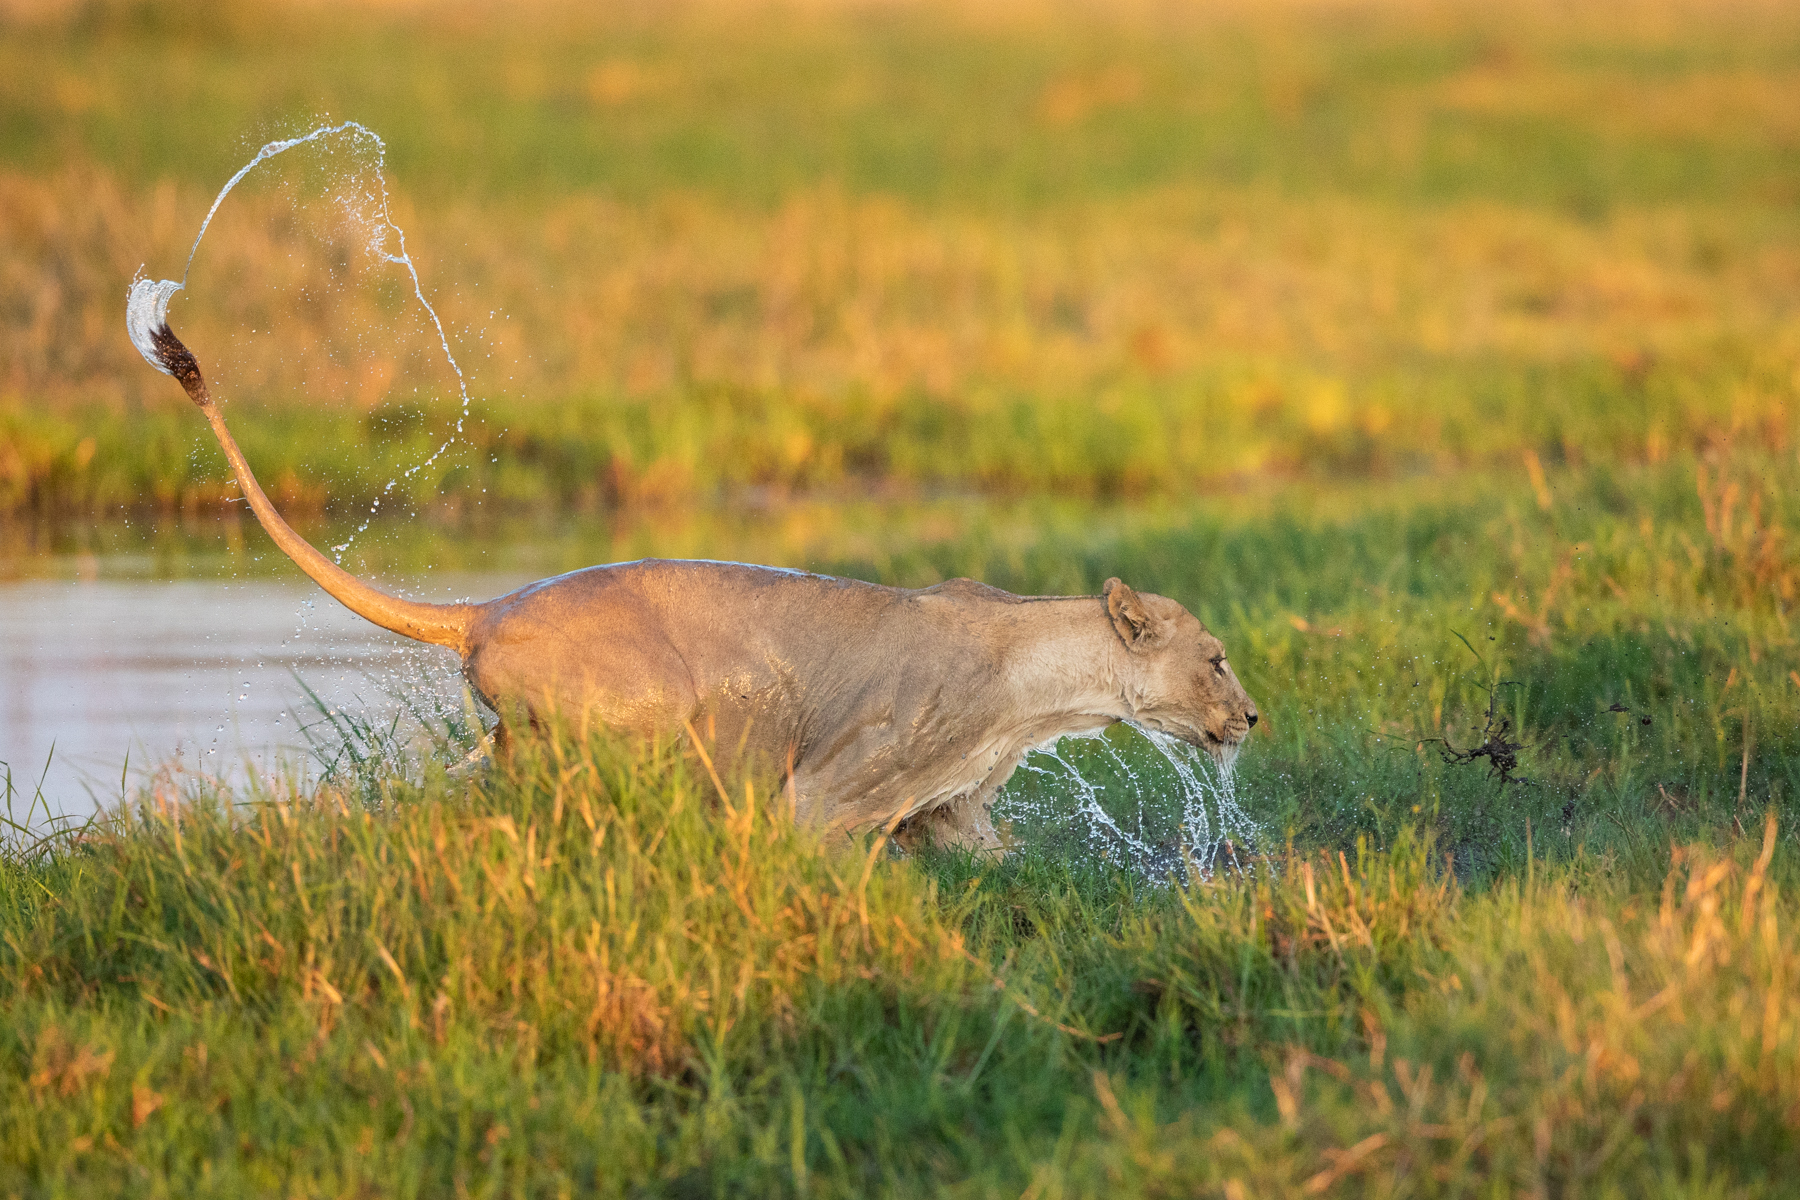 A Lioness shakes off the water after a river crossing